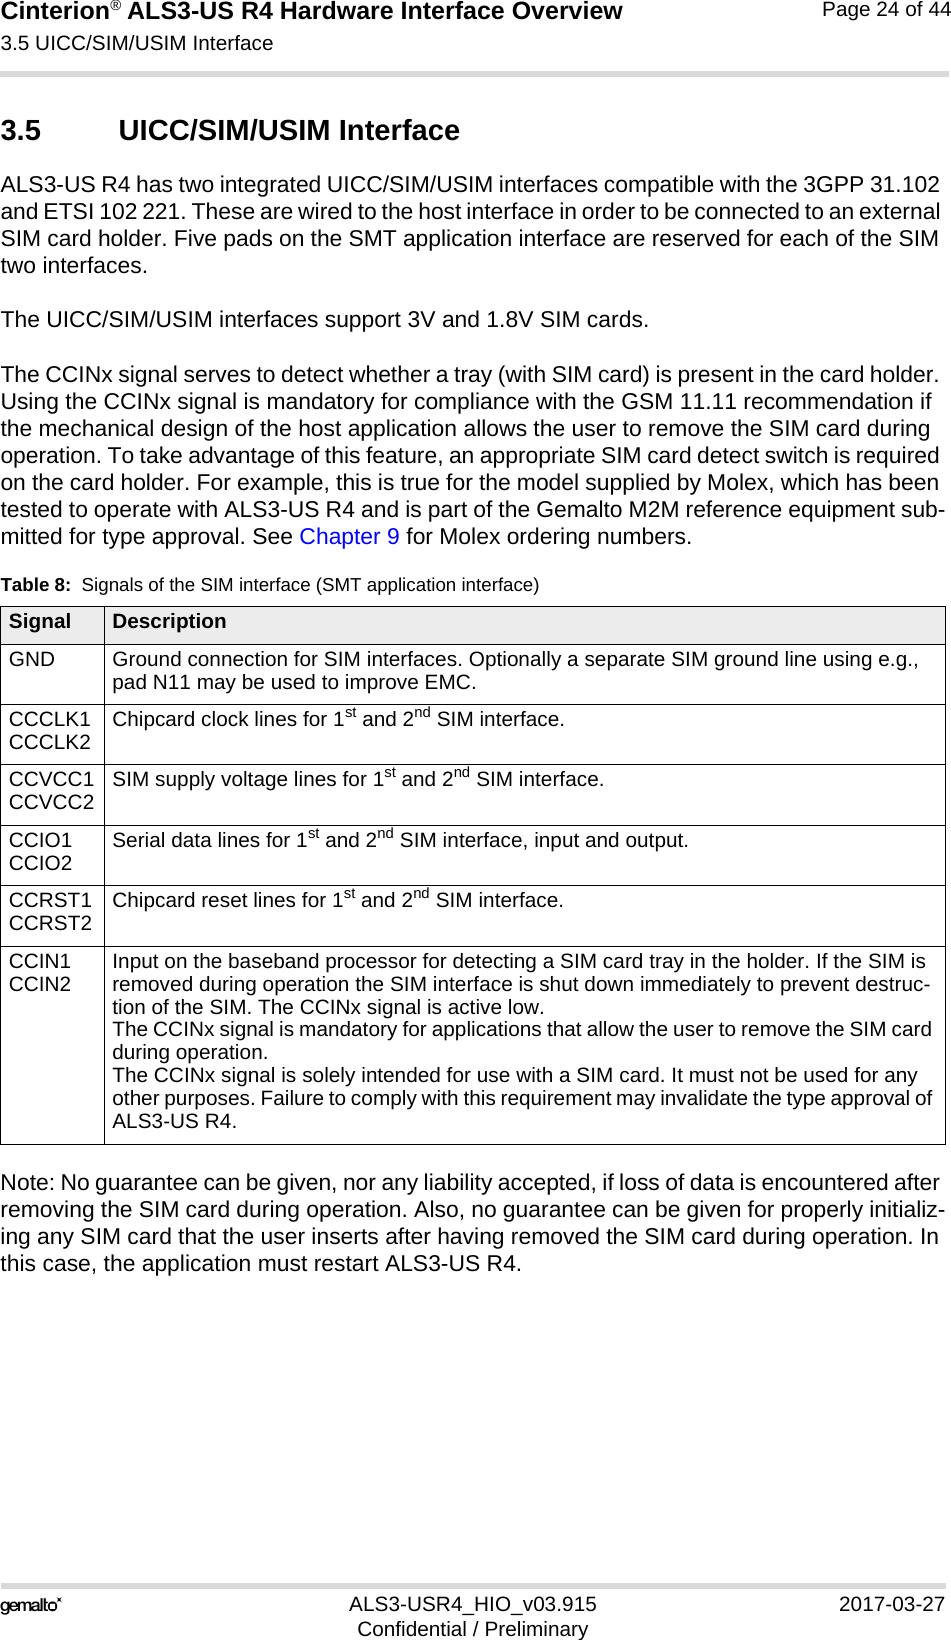 Cinterion® ALS3-US R4 Hardware Interface Overview3.5 UICC/SIM/USIM Interface27ALS3-USR4_HIO_v03.915 2017-03-27Confidential / PreliminaryPage 24 of 443.5 UICC/SIM/USIM InterfaceALS3-US R4 has two integrated UICC/SIM/USIM interfaces compatible with the 3GPP 31.102 and ETSI 102 221. These are wired to the host interface in order to be connected to an external SIM card holder. Five pads on the SMT application interface are reserved for each of the SIM two interfaces. The UICC/SIM/USIM interfaces support 3V and 1.8V SIM cards. The CCINx signal serves to detect whether a tray (with SIM card) is present in the card holder. Using the CCINx signal is mandatory for compliance with the GSM 11.11 recommendation if the mechanical design of the host application allows the user to remove the SIM card during operation. To take advantage of this feature, an appropriate SIM card detect switch is required on the card holder. For example, this is true for the model supplied by Molex, which has been tested to operate with ALS3-US R4 and is part of the Gemalto M2M reference equipment sub-mitted for type approval. See Chapter 9 for Molex ordering numbers.Note: No guarantee can be given, nor any liability accepted, if loss of data is encountered after removing the SIM card during operation. Also, no guarantee can be given for properly initializ-ing any SIM card that the user inserts after having removed the SIM card during operation. In this case, the application must restart ALS3-US R4.Table 8:  Signals of the SIM interface (SMT application interface)Signal DescriptionGND Ground connection for SIM interfaces. Optionally a separate SIM ground line using e.g., pad N11 may be used to improve EMC.CCCLK1CCCLK2 Chipcard clock lines for 1st and 2nd SIM interface.CCVCC1CCVCC2 SIM supply voltage lines for 1st and 2nd SIM interface.CCIO1CCIO2 Serial data lines for 1st and 2nd SIM interface, input and output.CCRST1CCRST2 Chipcard reset lines for 1st and 2nd SIM interface.CCIN1CCIN2 Input on the baseband processor for detecting a SIM card tray in the holder. If the SIM is removed during operation the SIM interface is shut down immediately to prevent destruc-tion of the SIM. The CCINx signal is active low.The CCINx signal is mandatory for applications that allow the user to remove the SIM card during operation. The CCINx signal is solely intended for use with a SIM card. It must not be used for any other purposes. Failure to comply with this requirement may invalidate the type approval of ALS3-US R4.